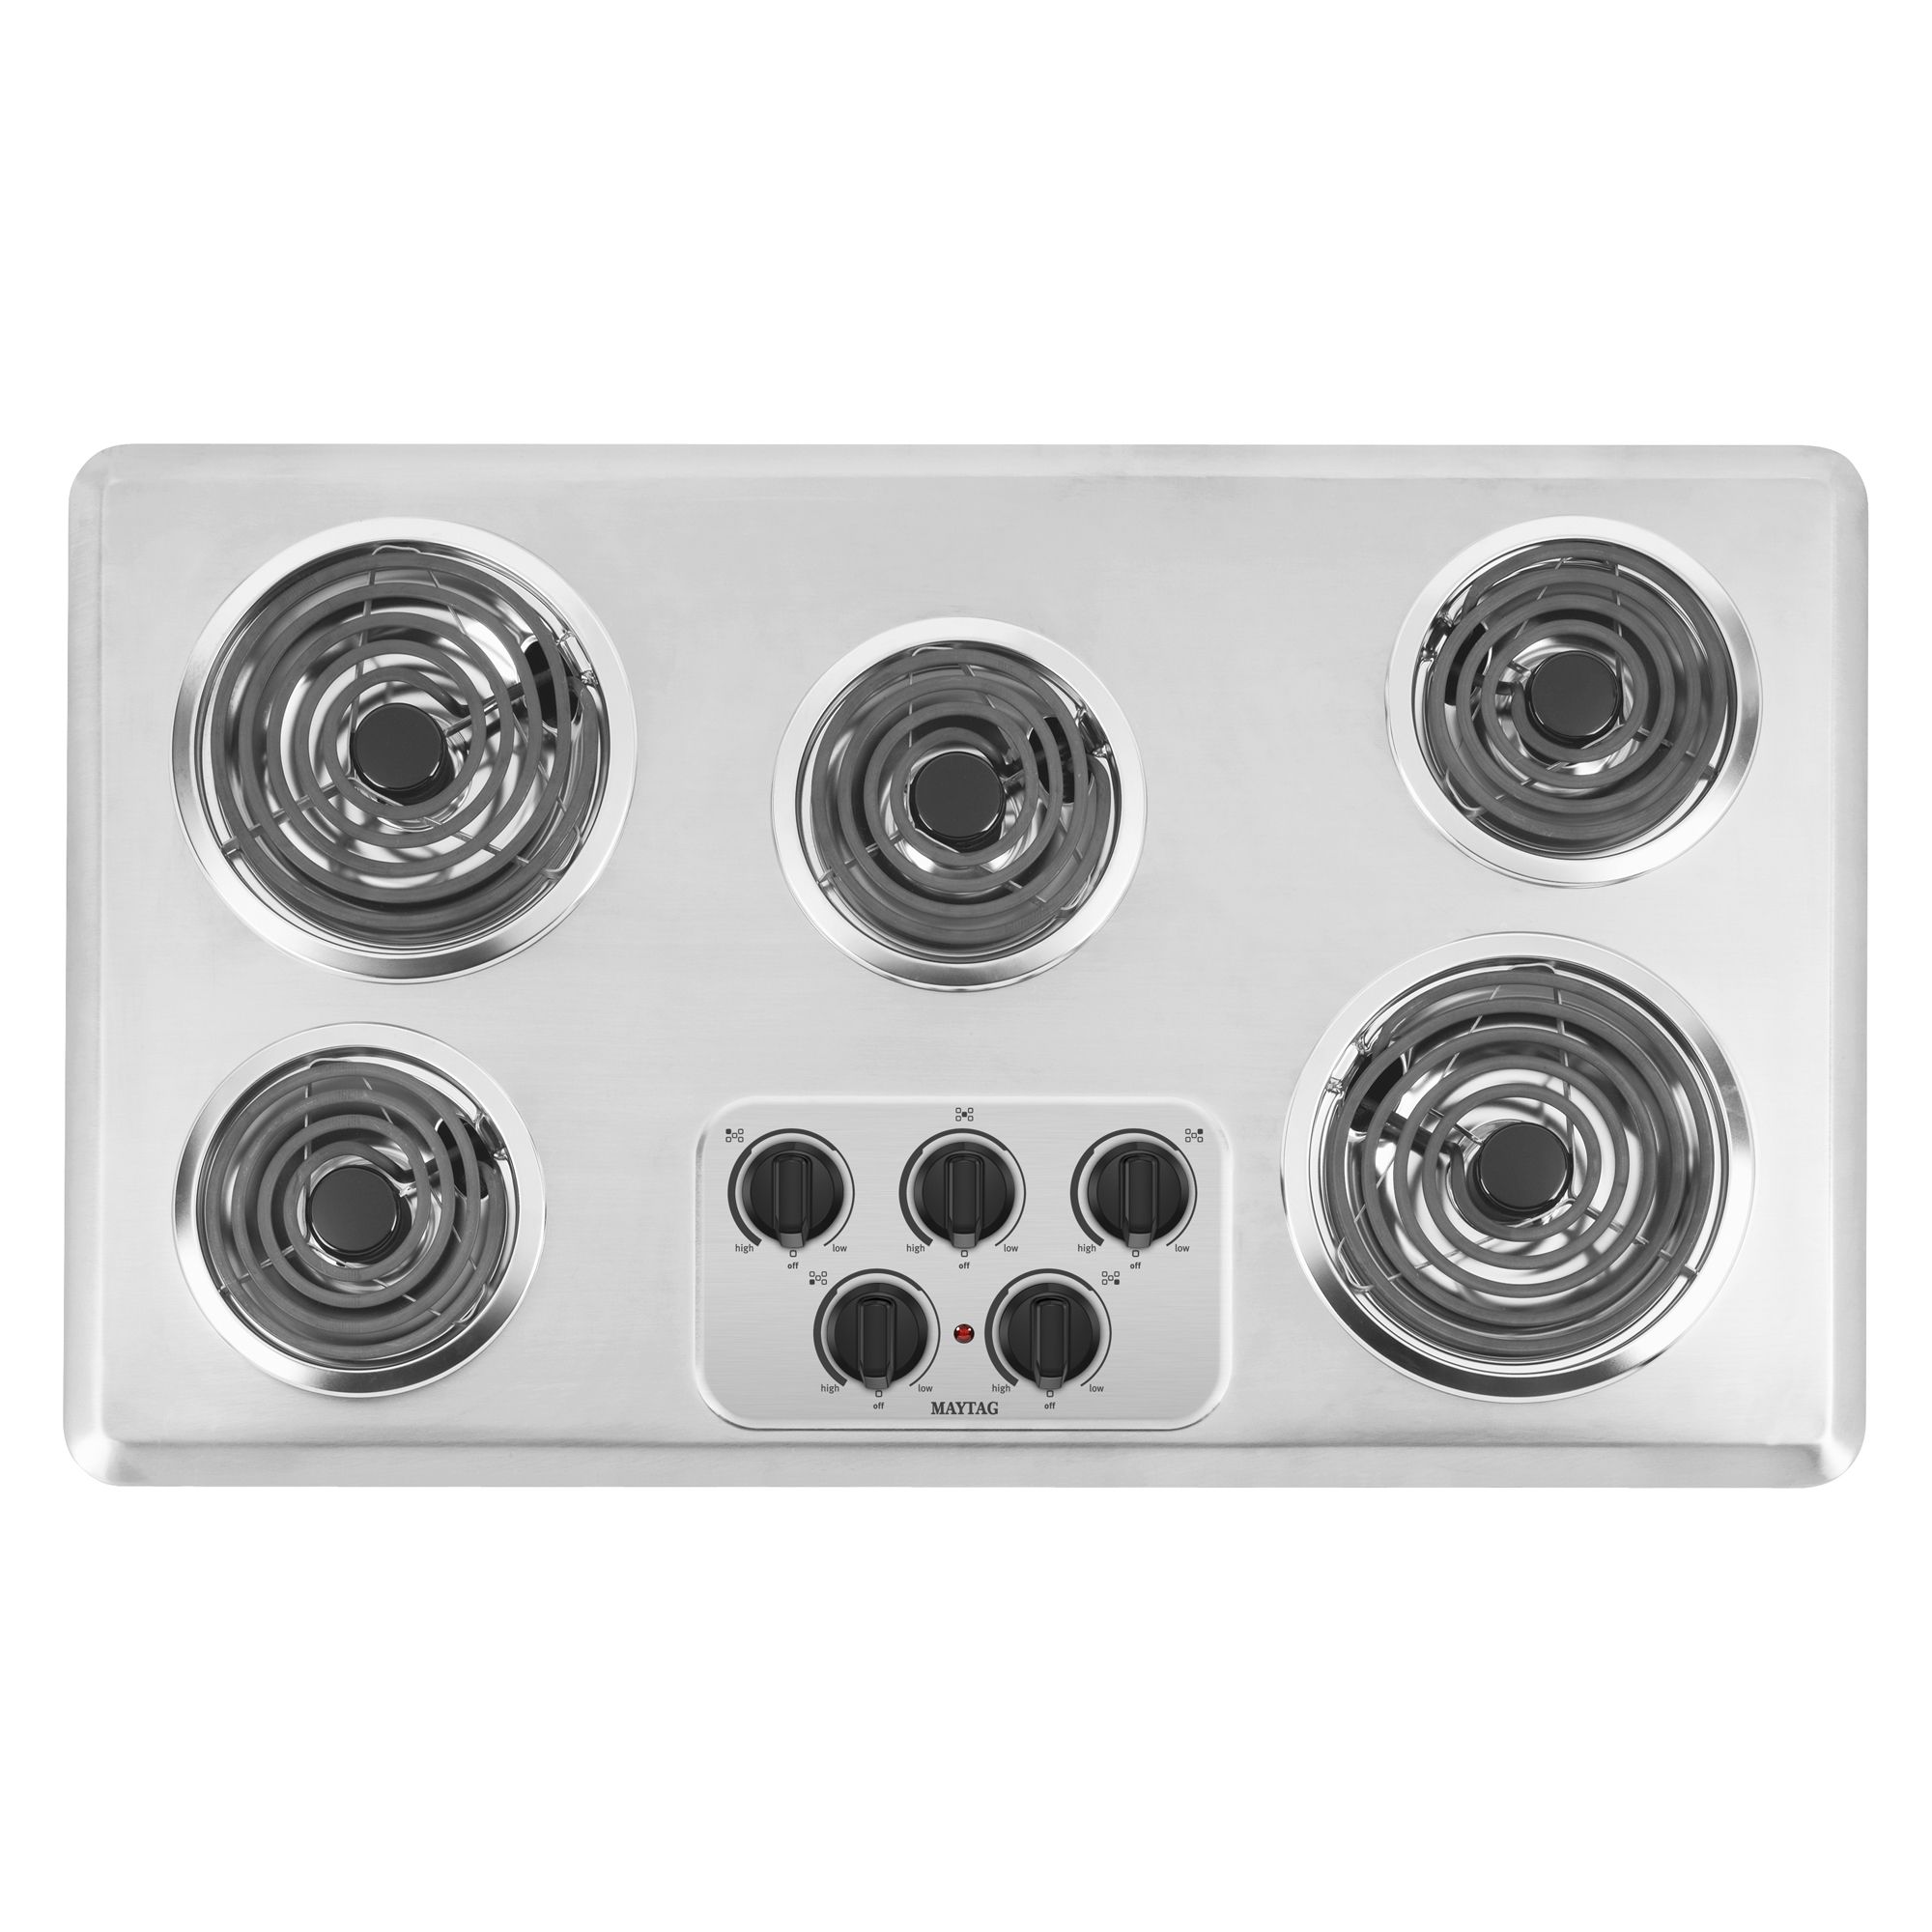 Maytag MEC4536WC 36" Electric Cooktop | Shop Your Way: Online Shopping